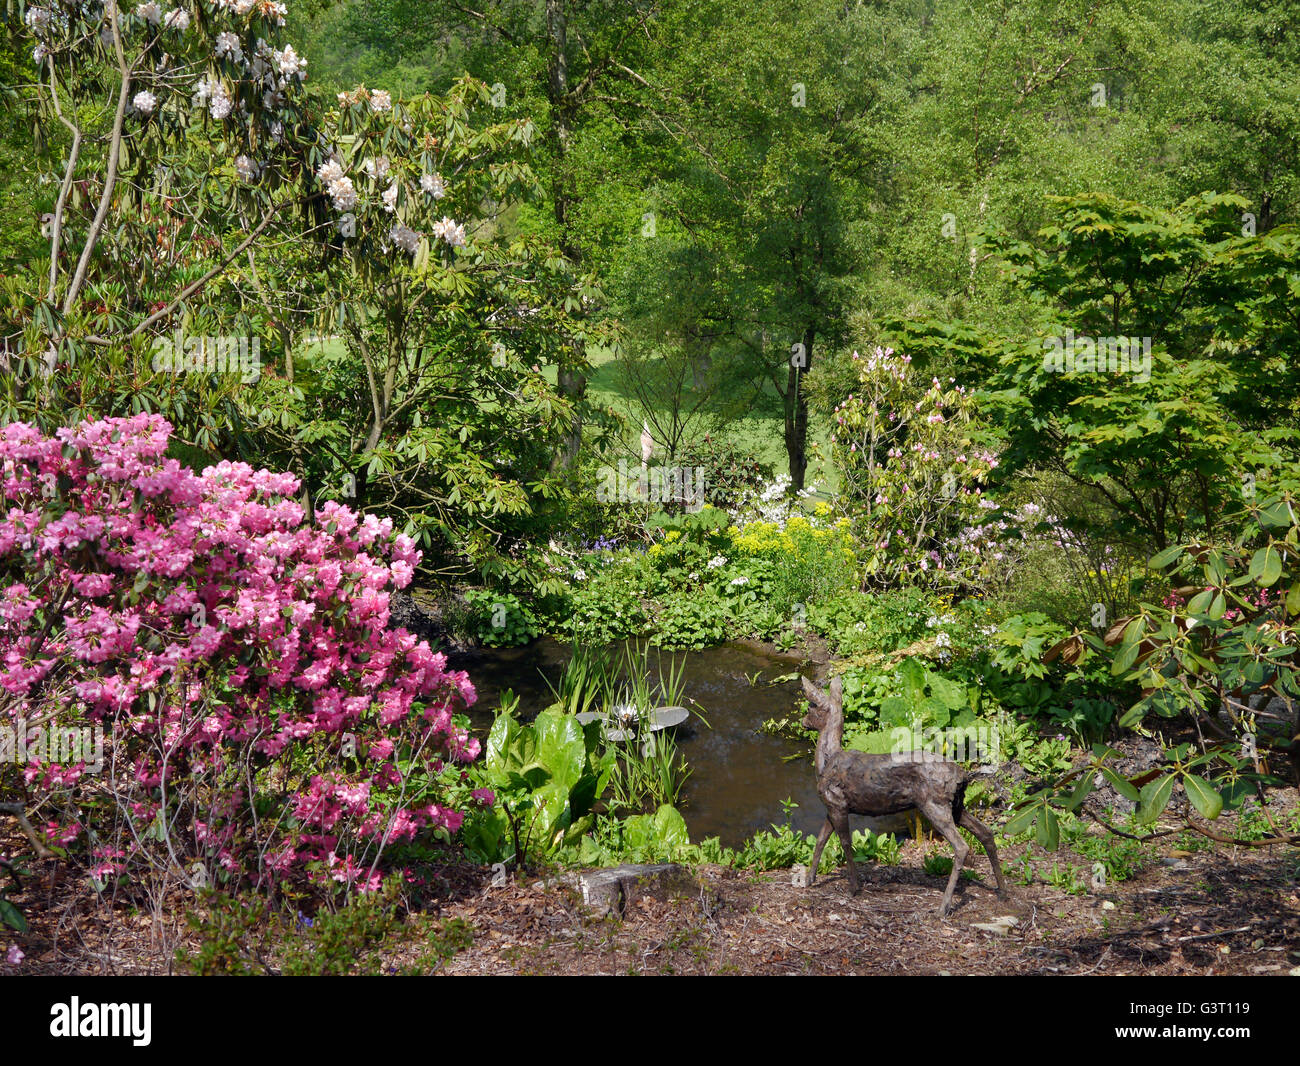 Sculpture of Small Deer Looking into Pond at the Himalayan Garden & Sculpture Park, North Yorkshire, England UK. Stock Photo